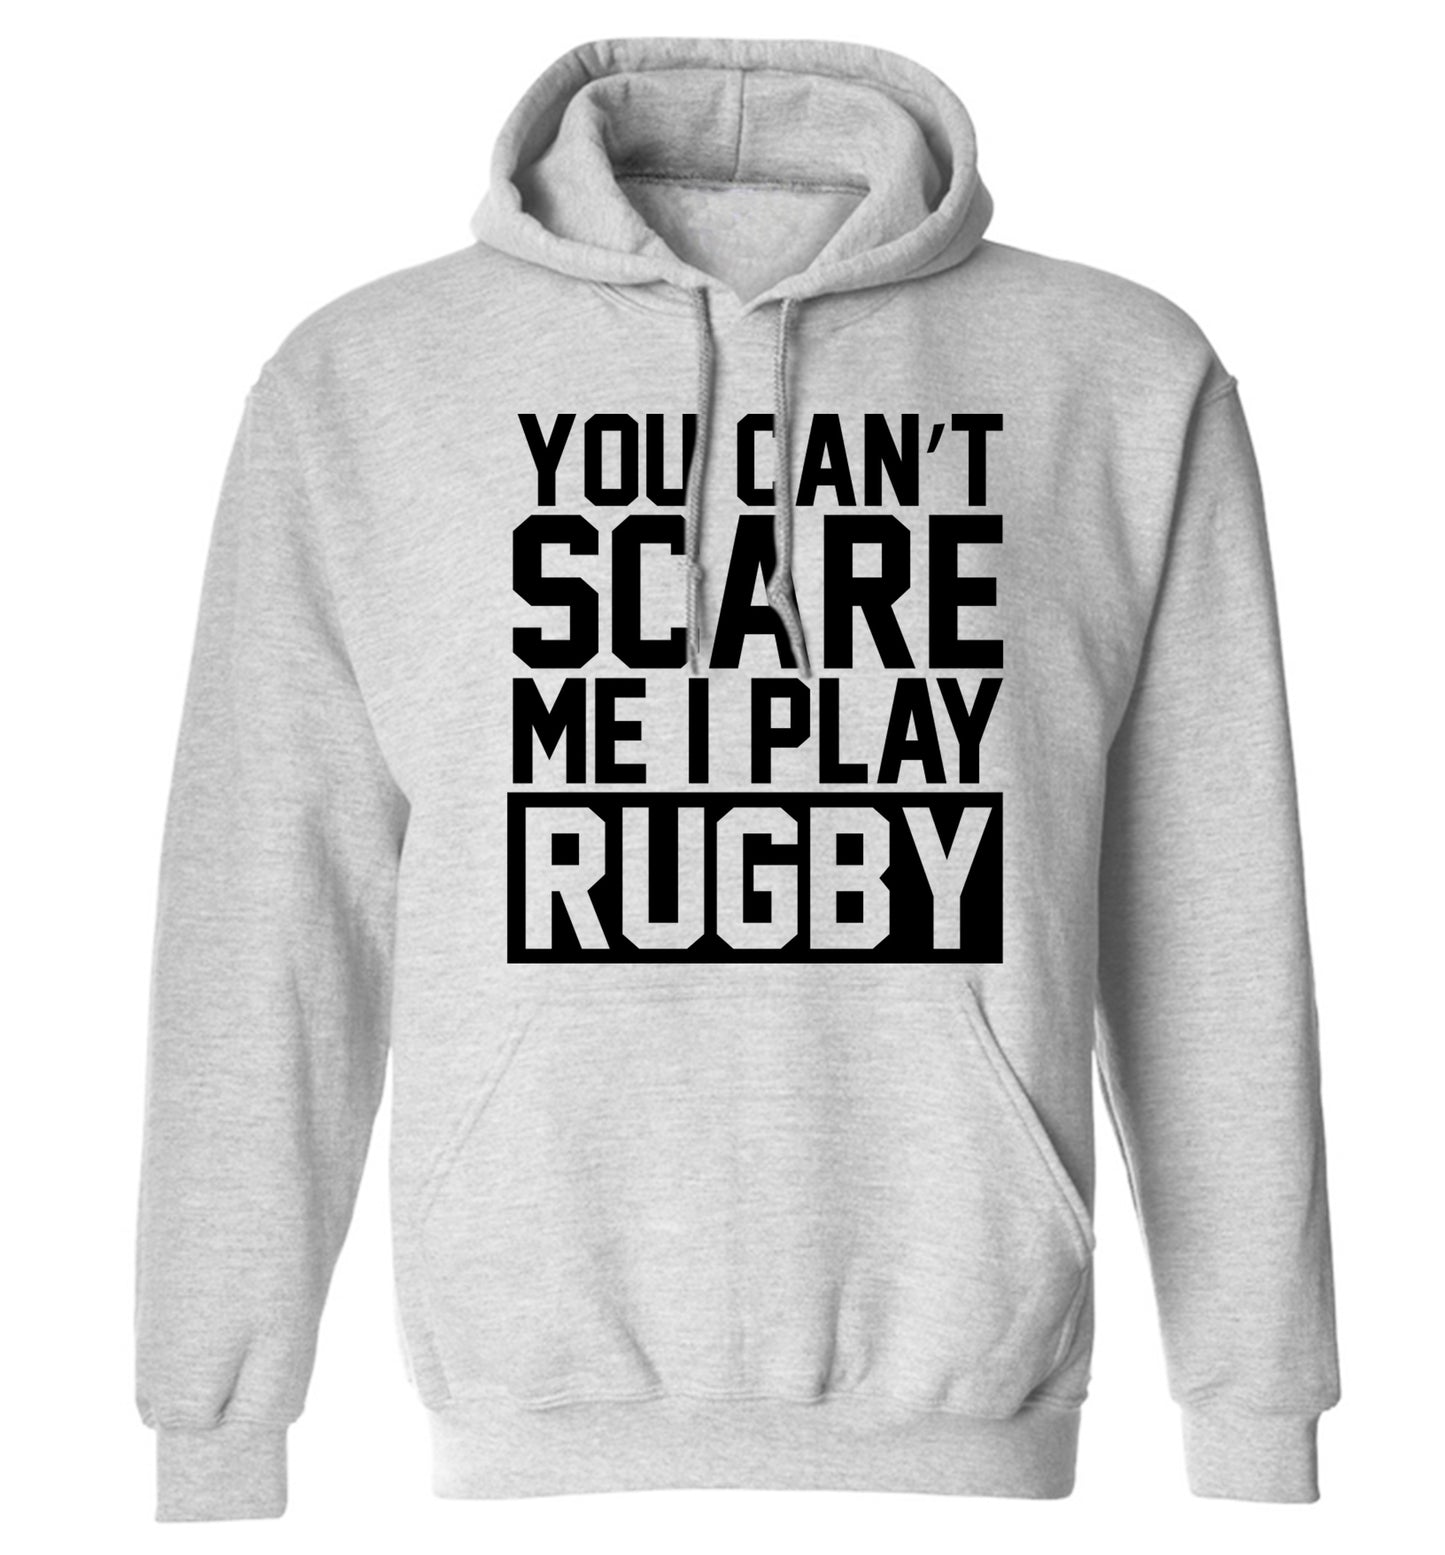 You can't scare me I play rugby adults unisex grey hoodie 2XL